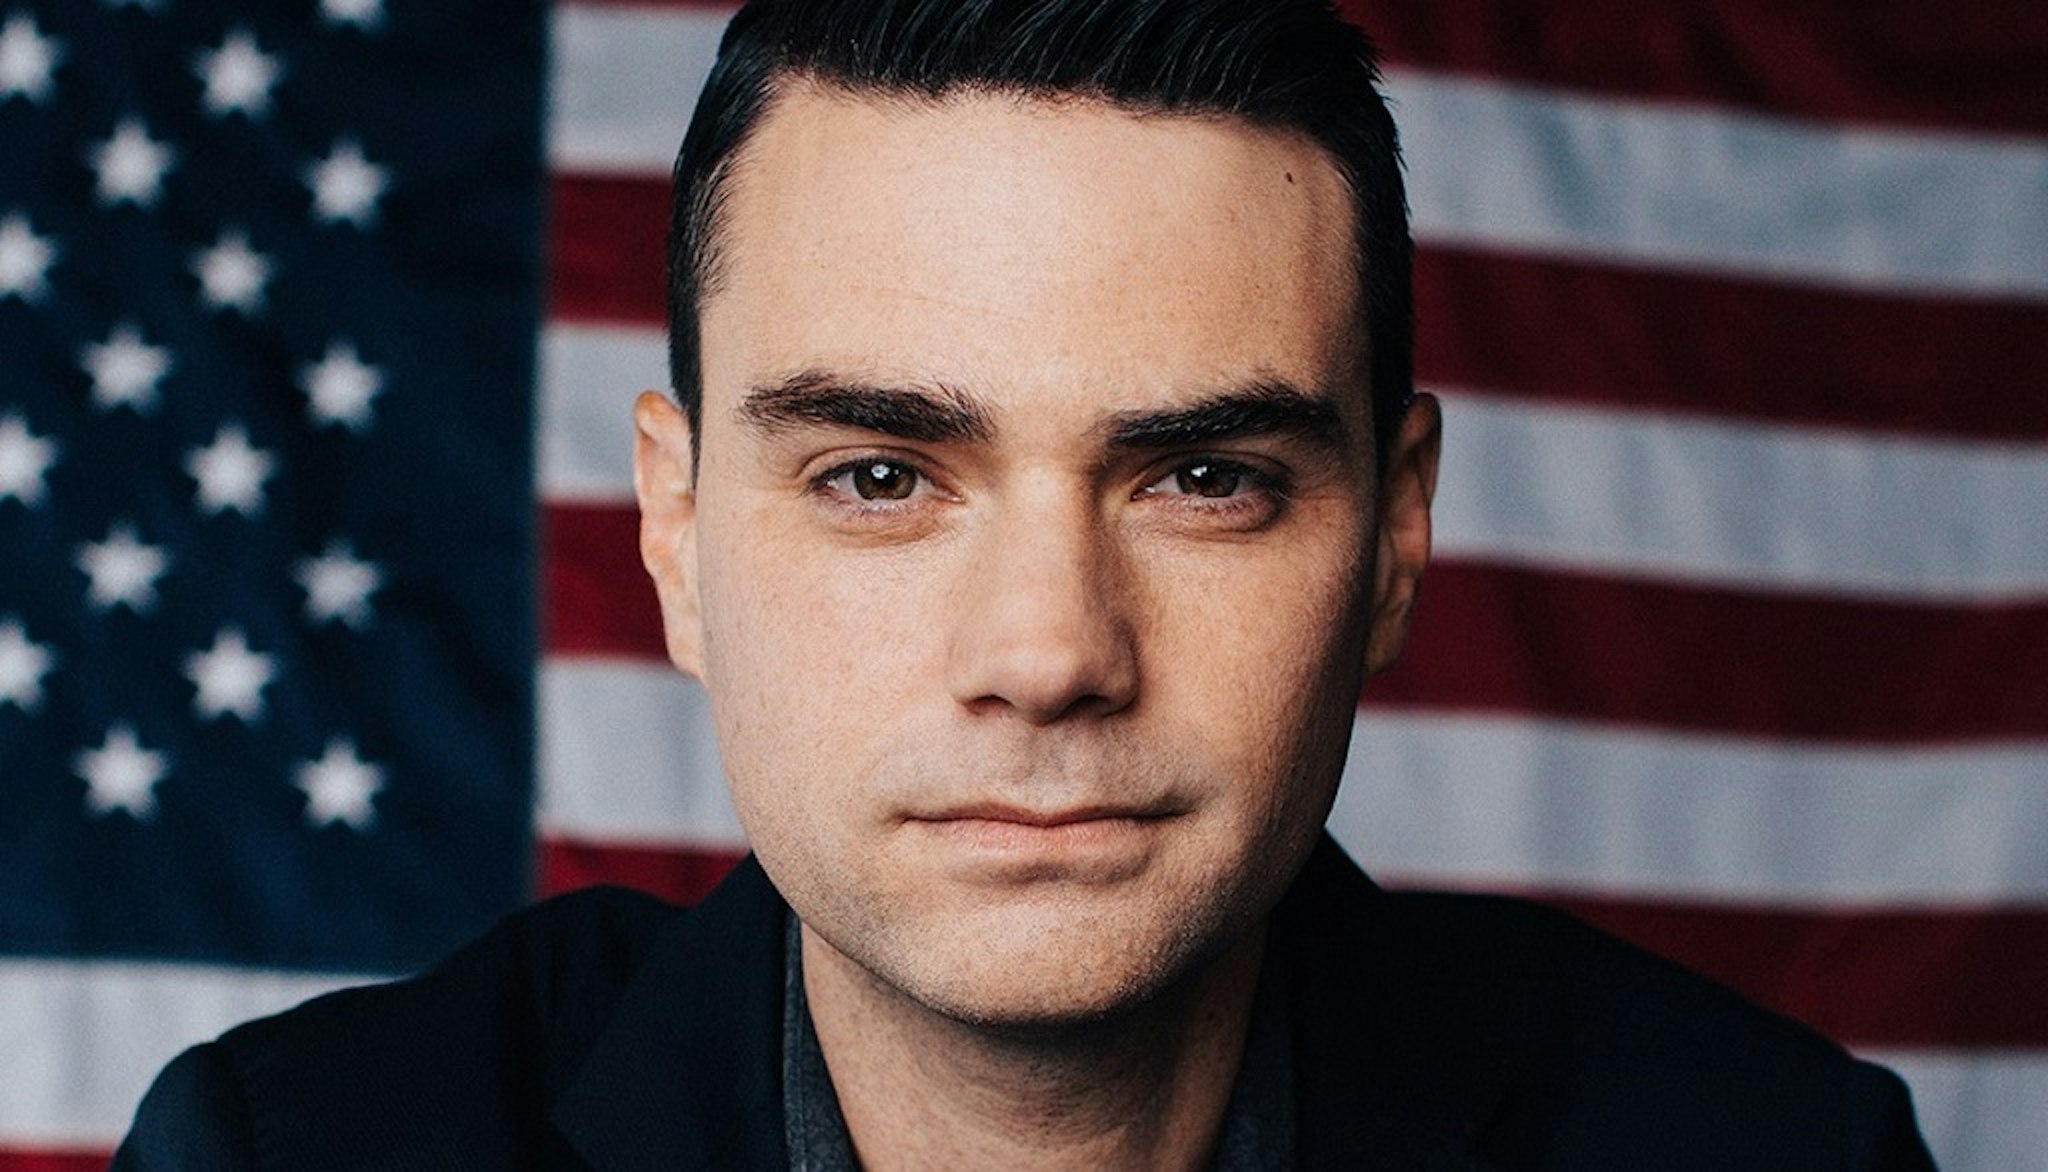 Ben Shapiro To Give Response To Biden’s ‘State Of The Union.’ Here’s